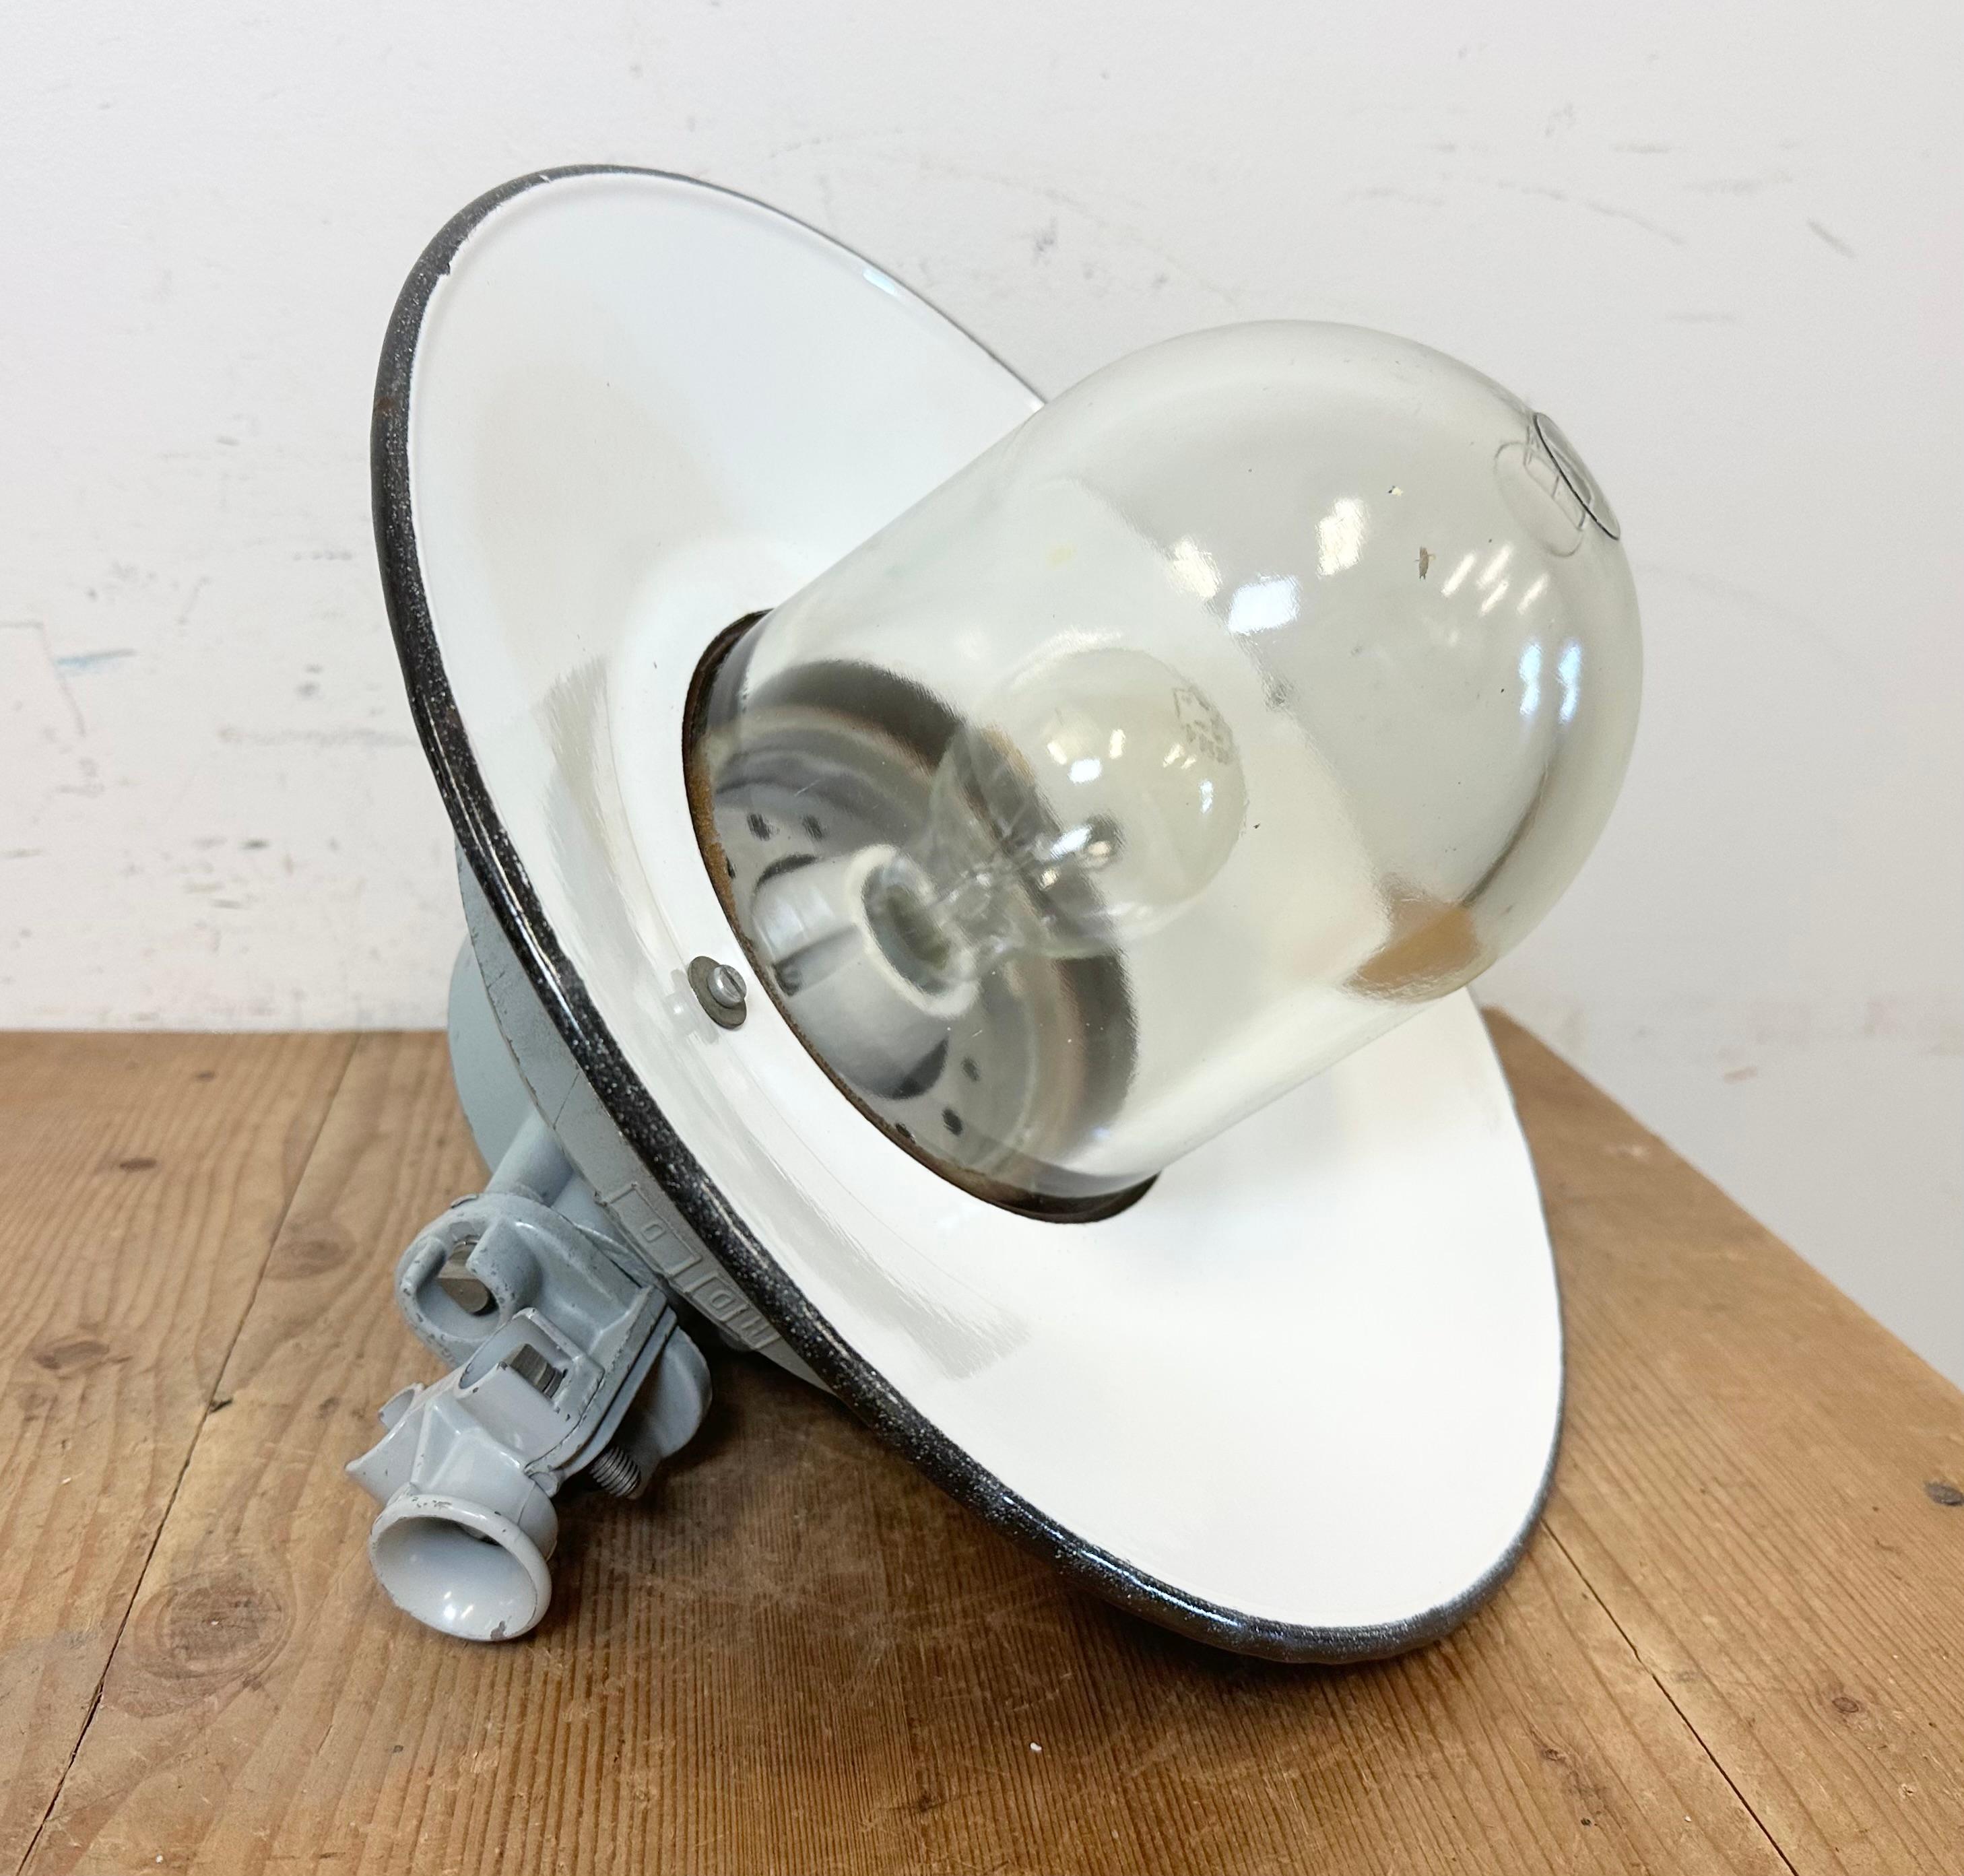 Grey Cast Aluminium Explosion Proof Lamp with Enameled Shade, 1970s For Sale 7